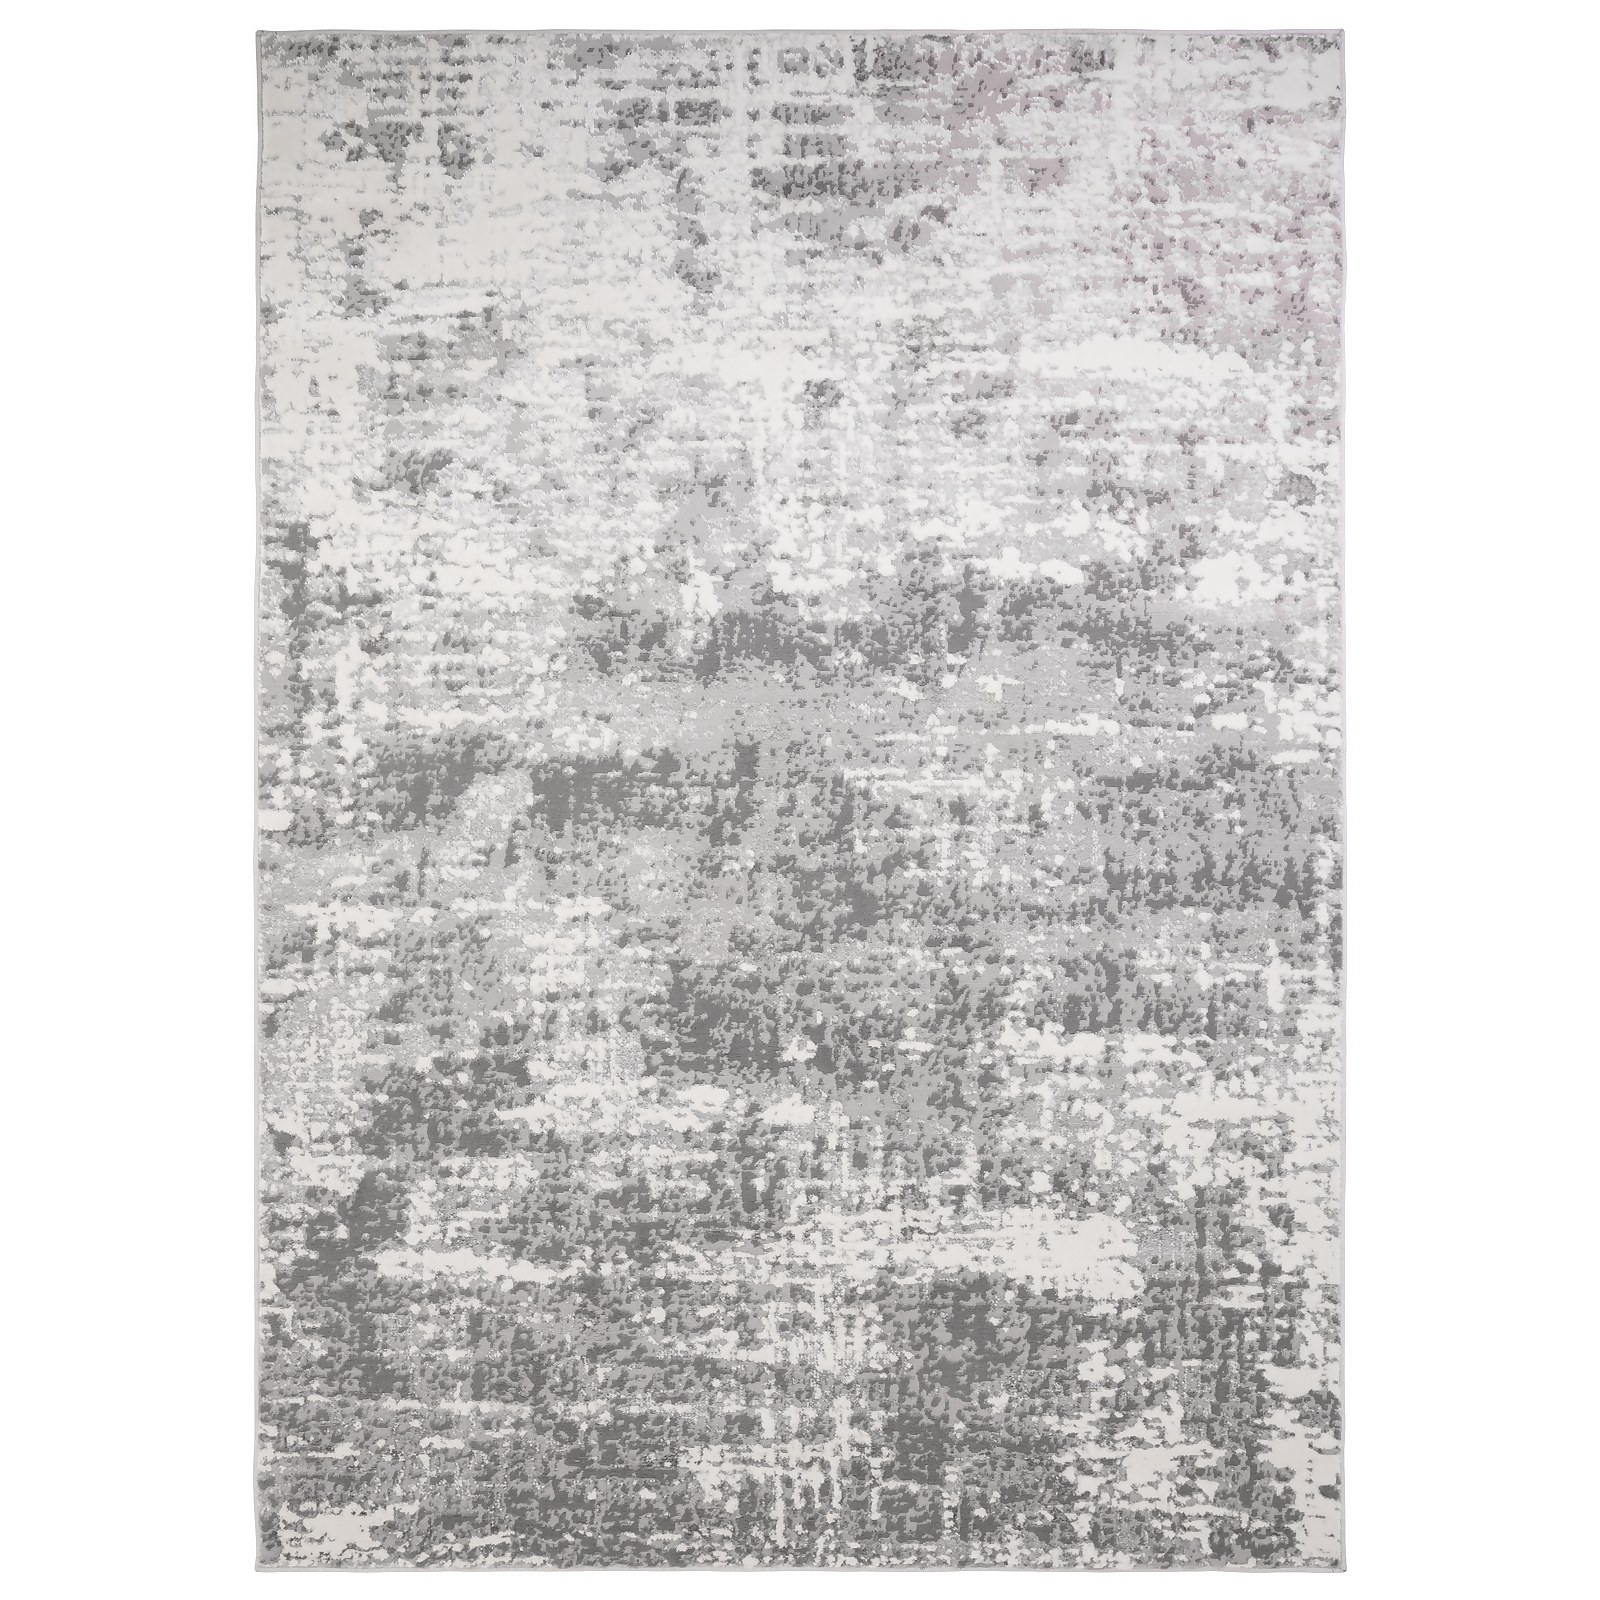 Photo of Luxe Abstract Textured Rug - 120x170cm